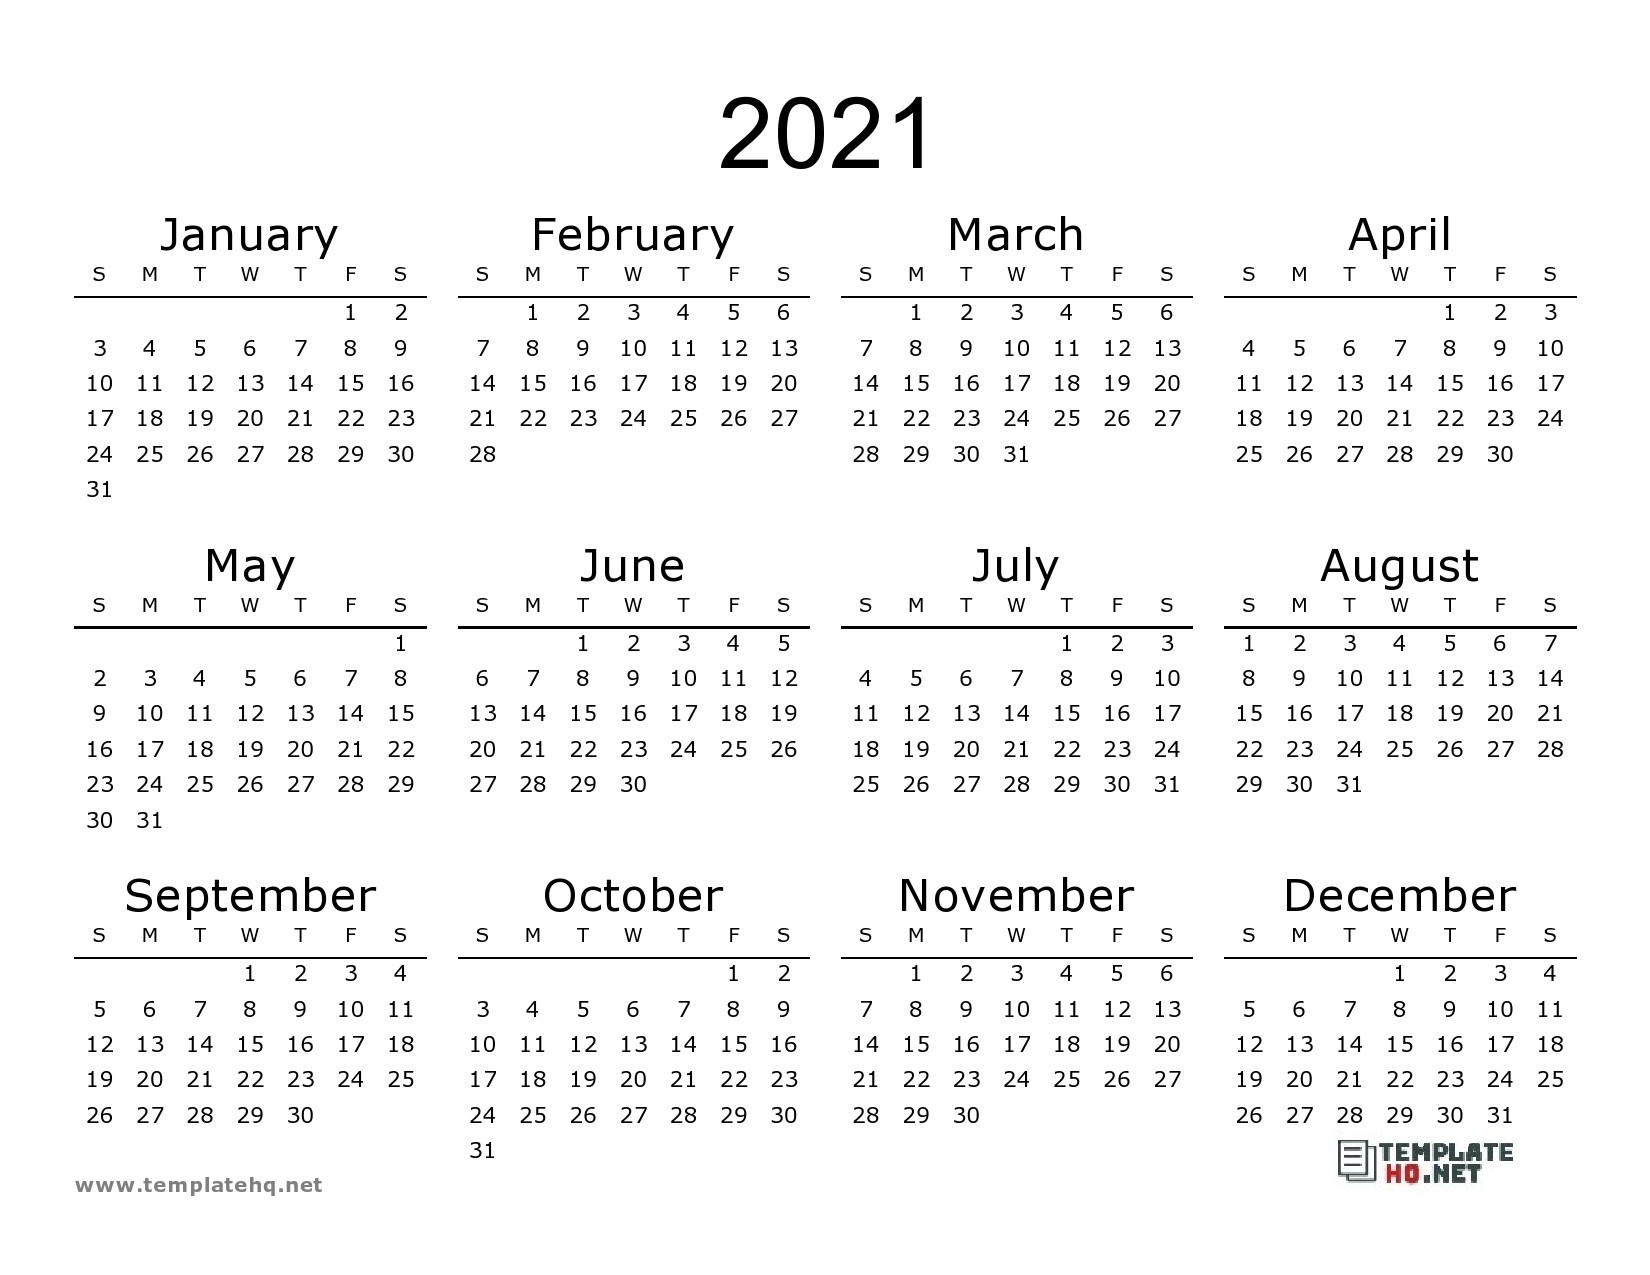 Calendar 2021 to Print Free Simple for All Users